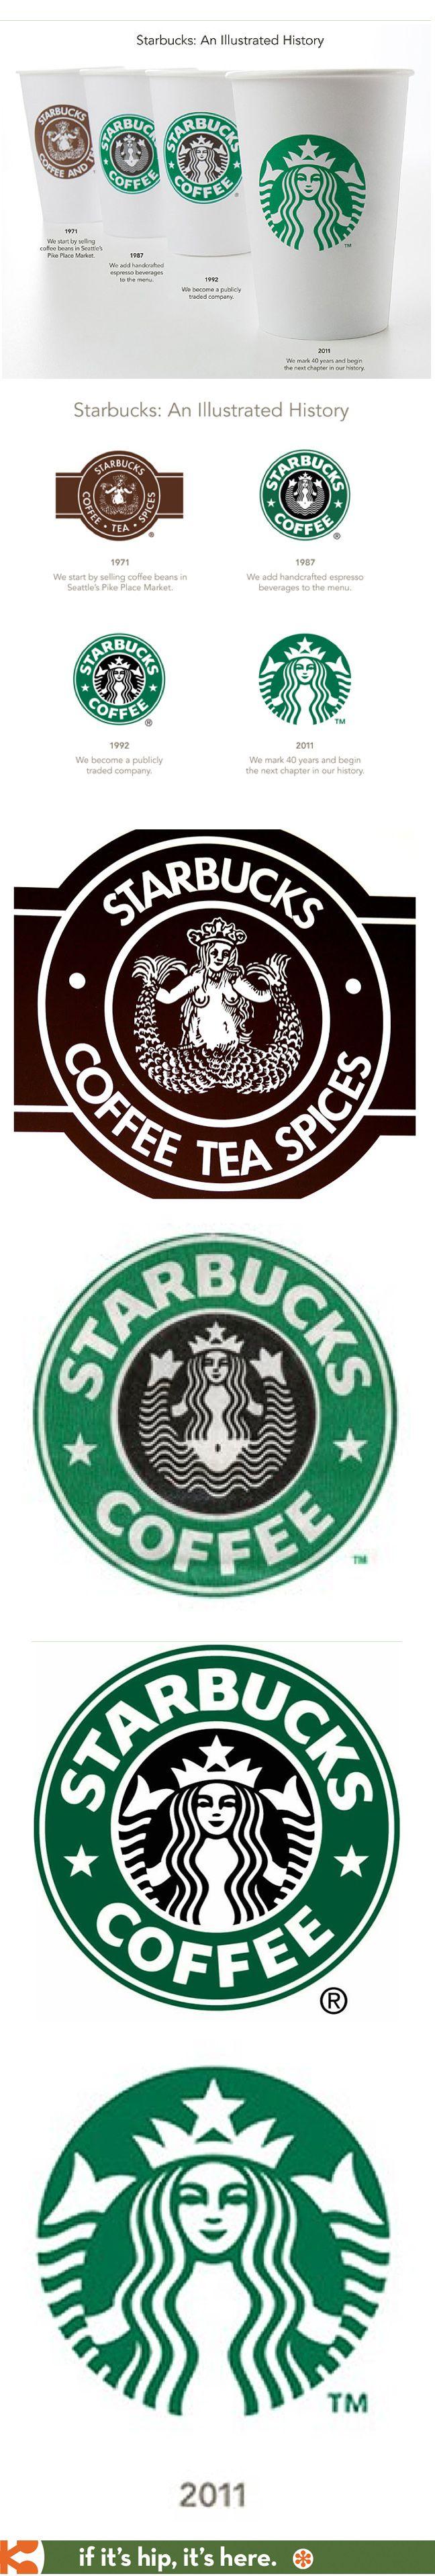 Small History Logo - Evolution of the Starbucks Logo Small changes to update a logo as ...